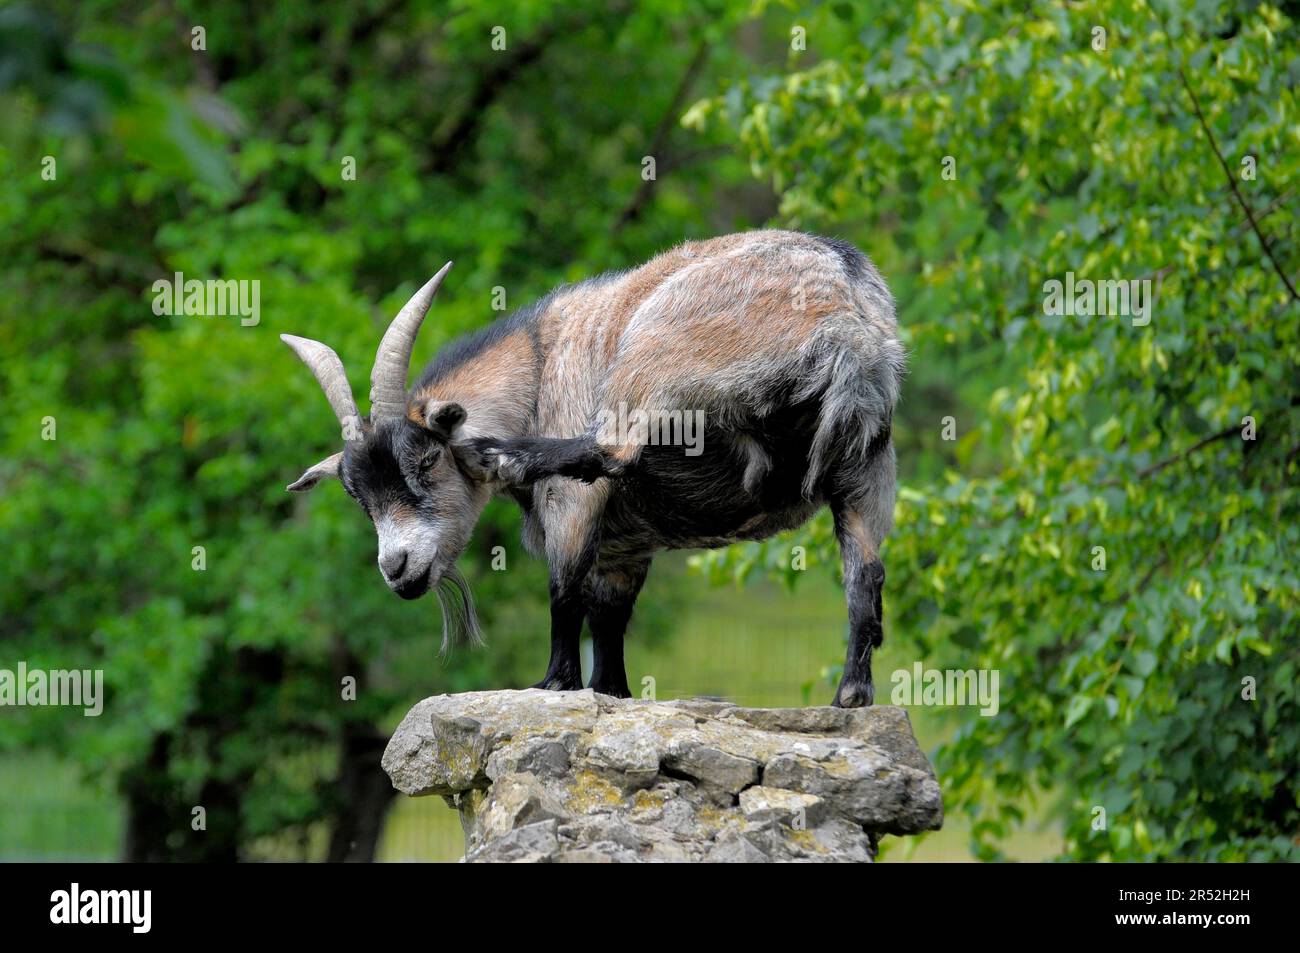 Goat in zoo, scratching, itching Stock Photo